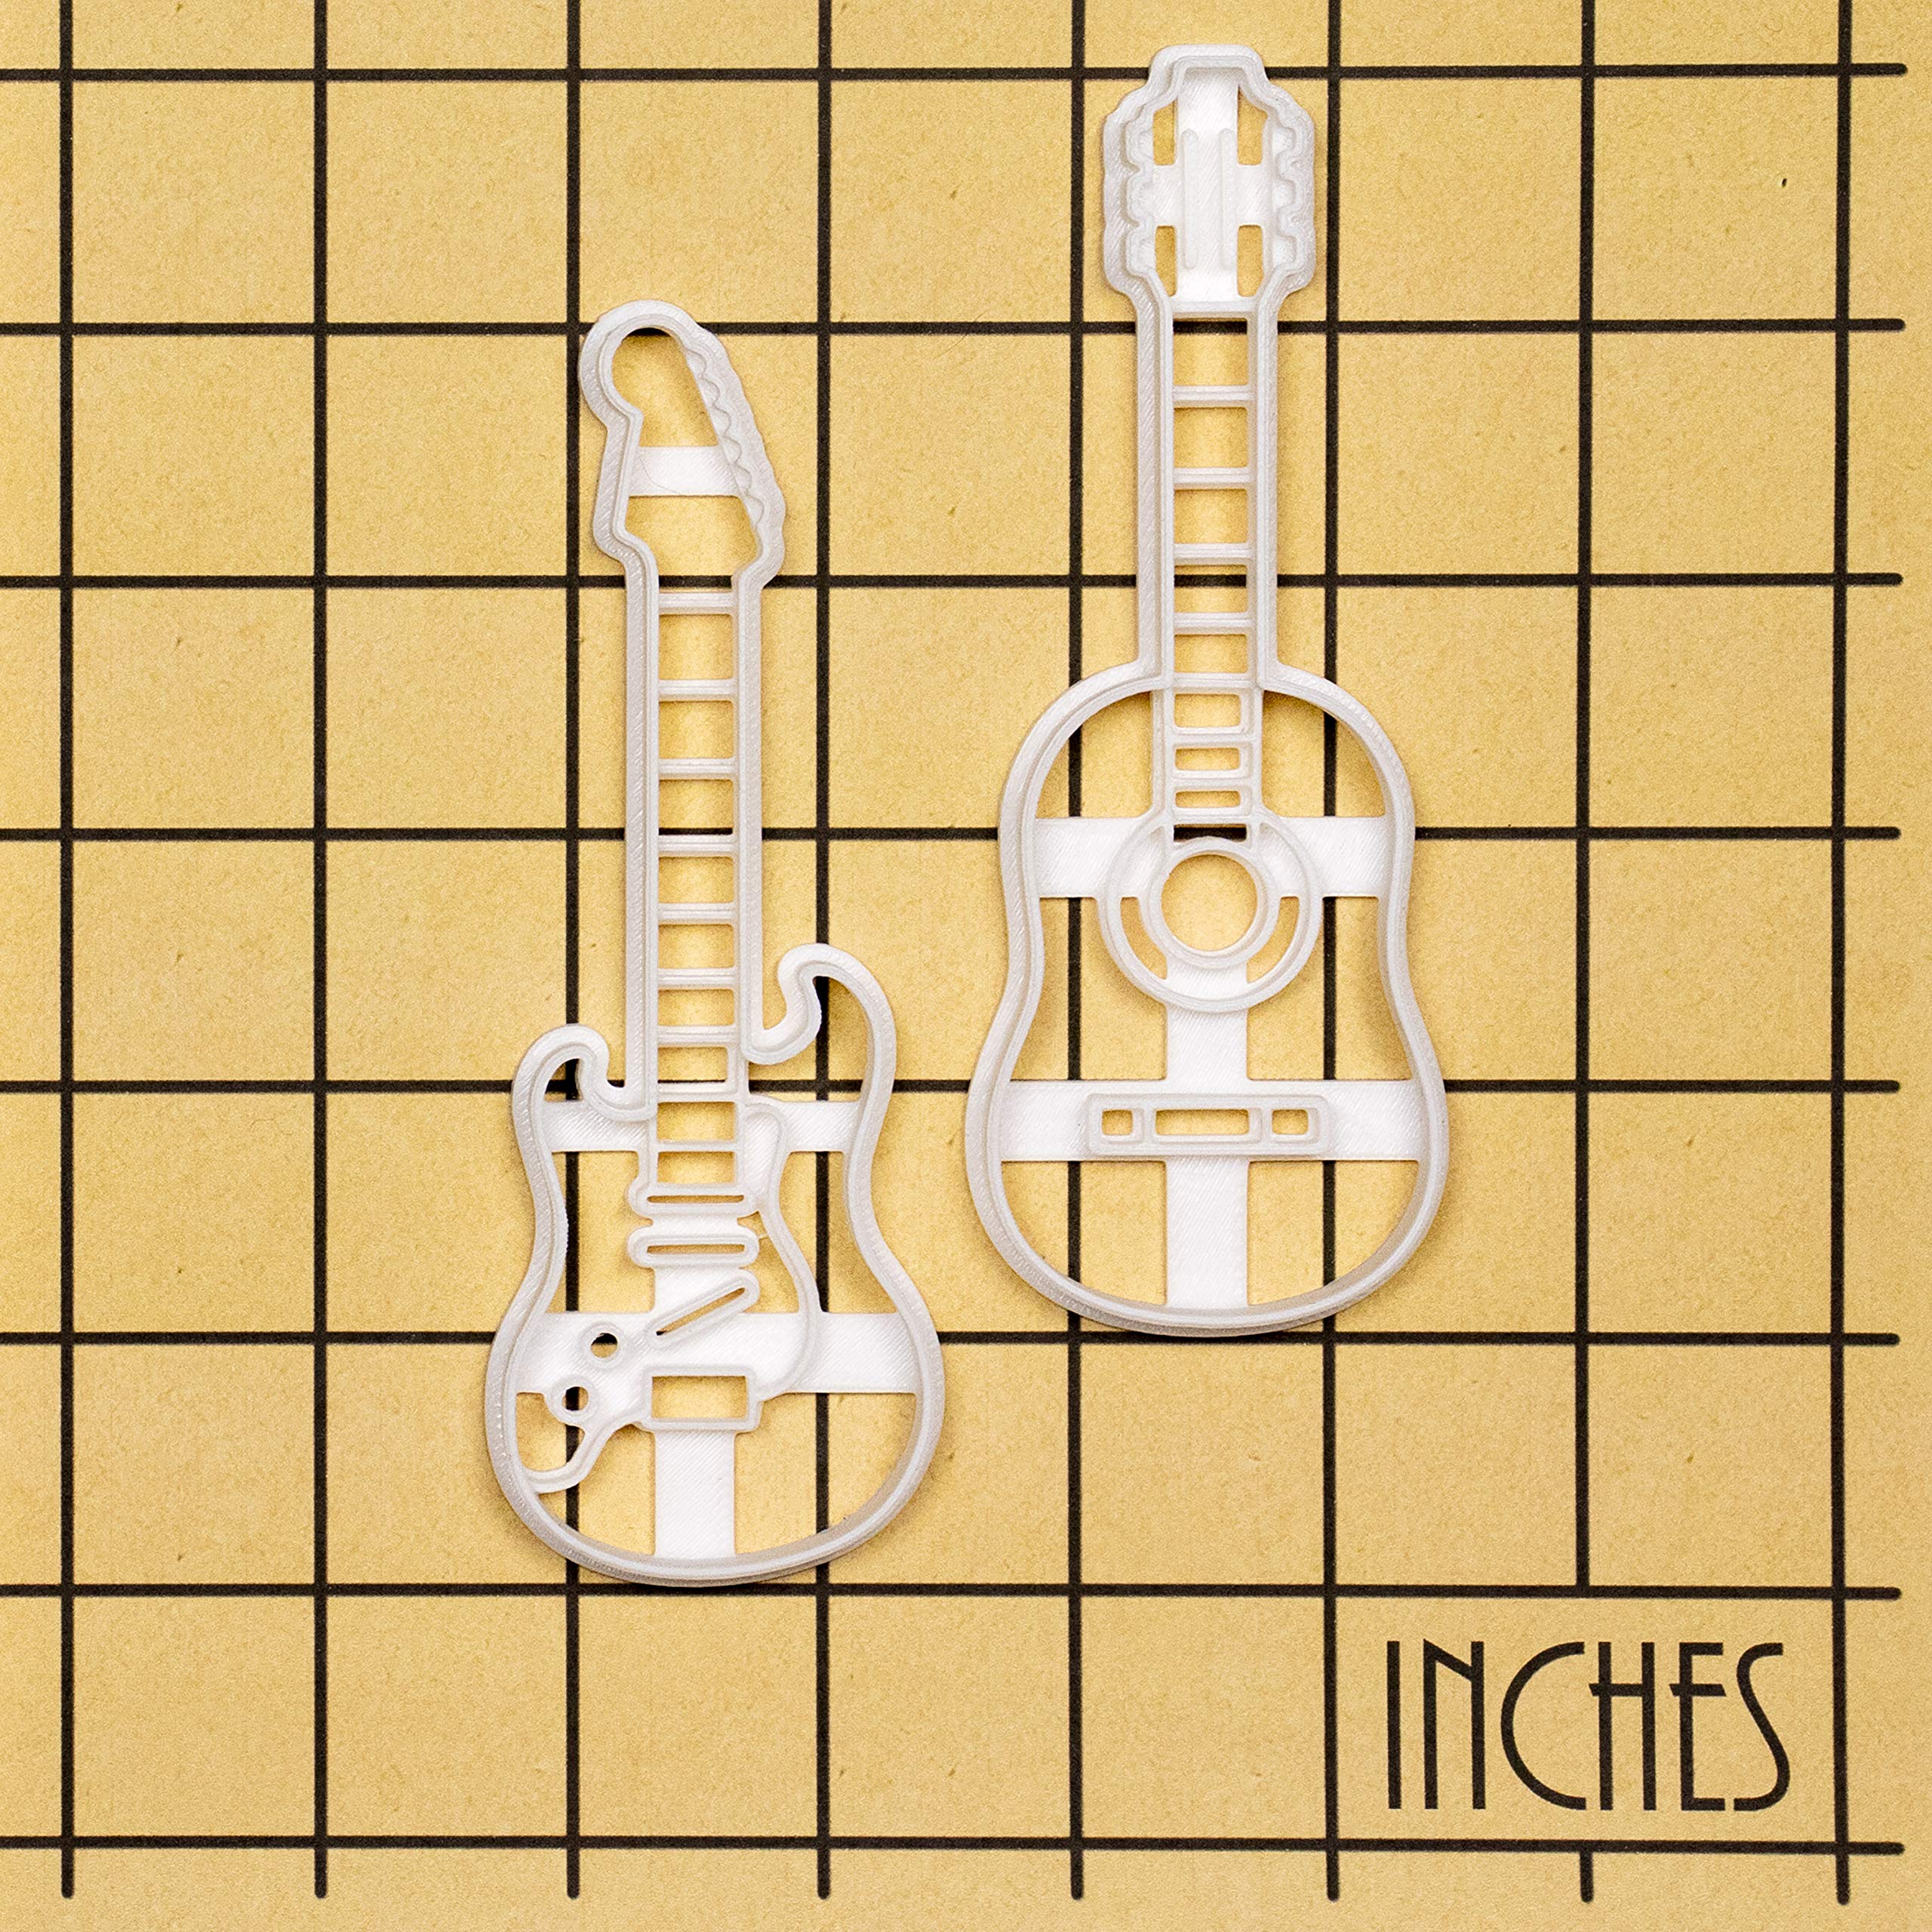 Set of 2 Guitar cookie cutters (Designs: Acoustic and Electric Guitar), 2 pieces - Bakerlogy